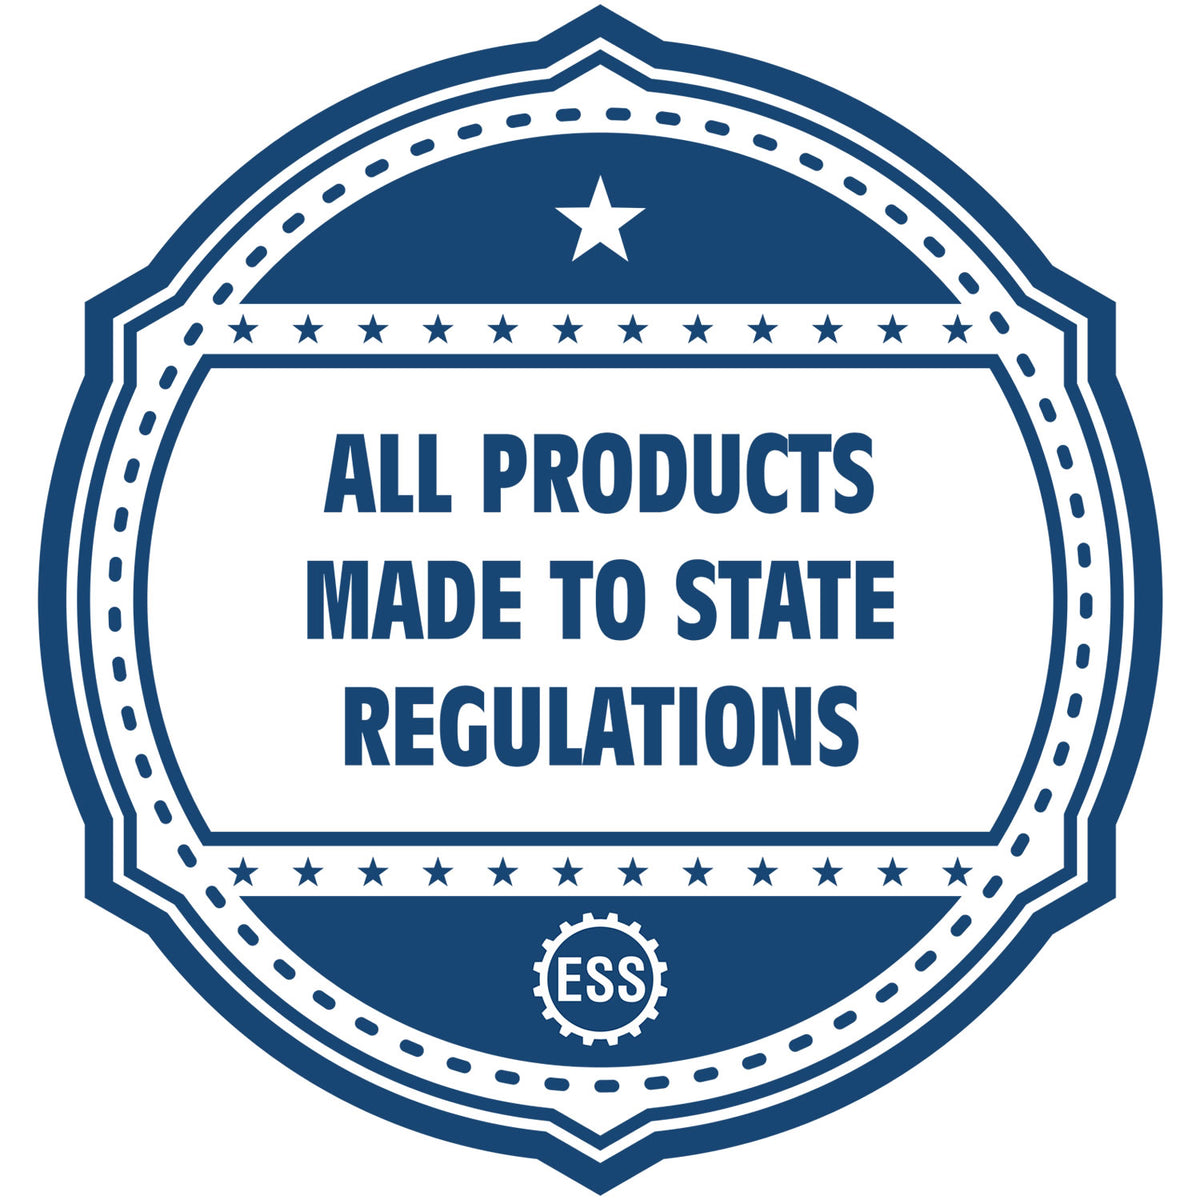 An icon or badge element for the PSI Utah Notary Stamp showing that this product is made in compliance with state regulations.